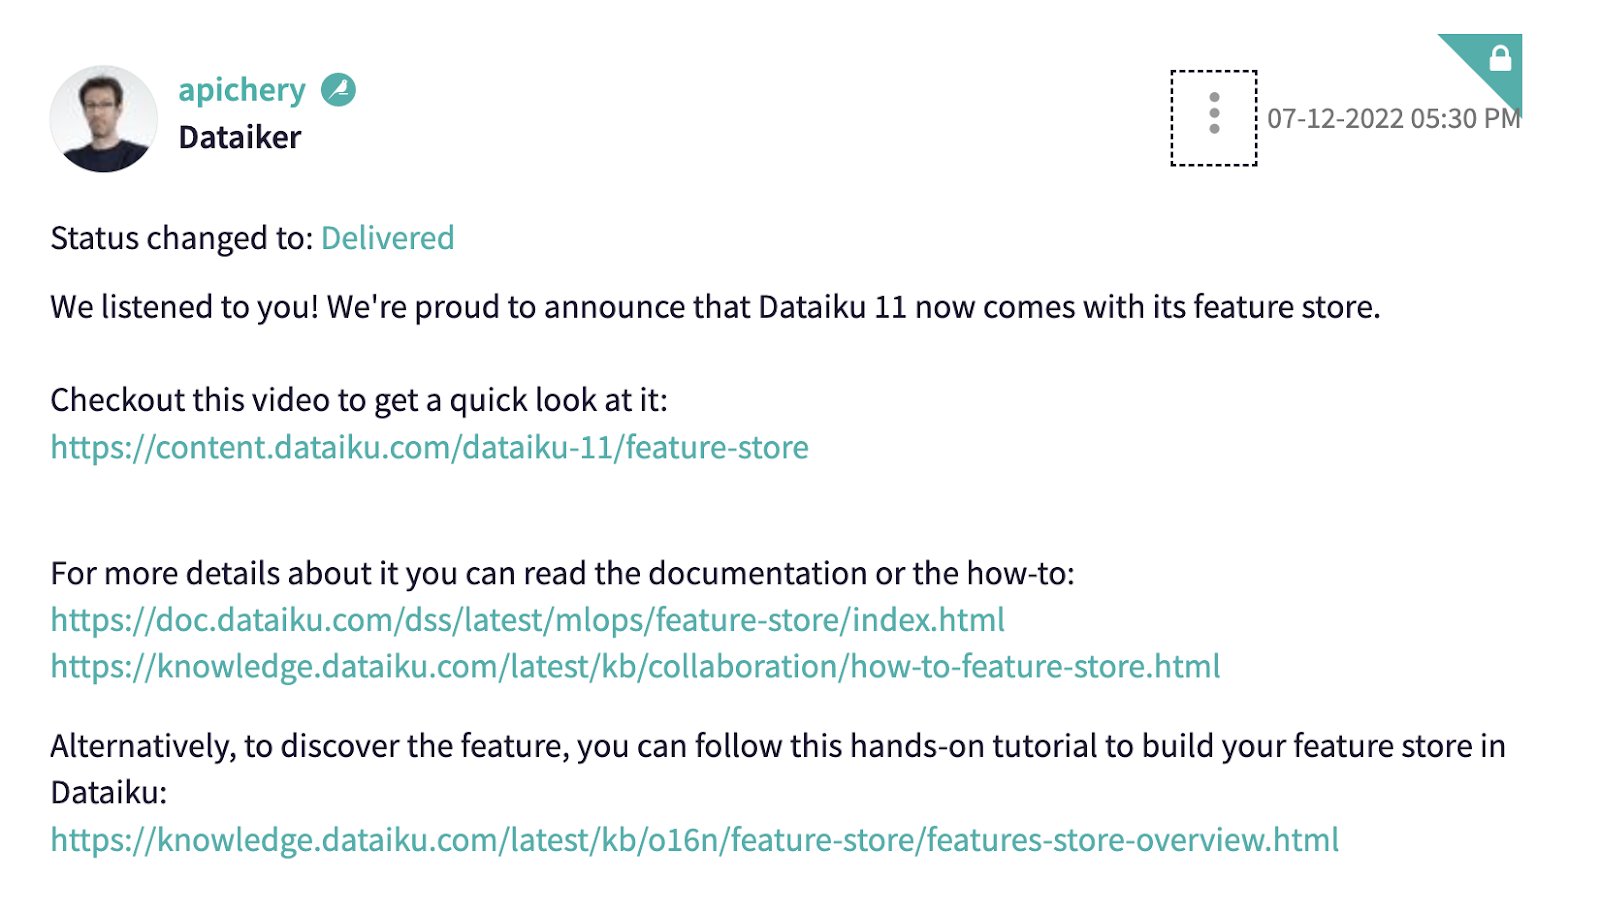 Status update on this Product Idea from Dataiku's VP of Engineering